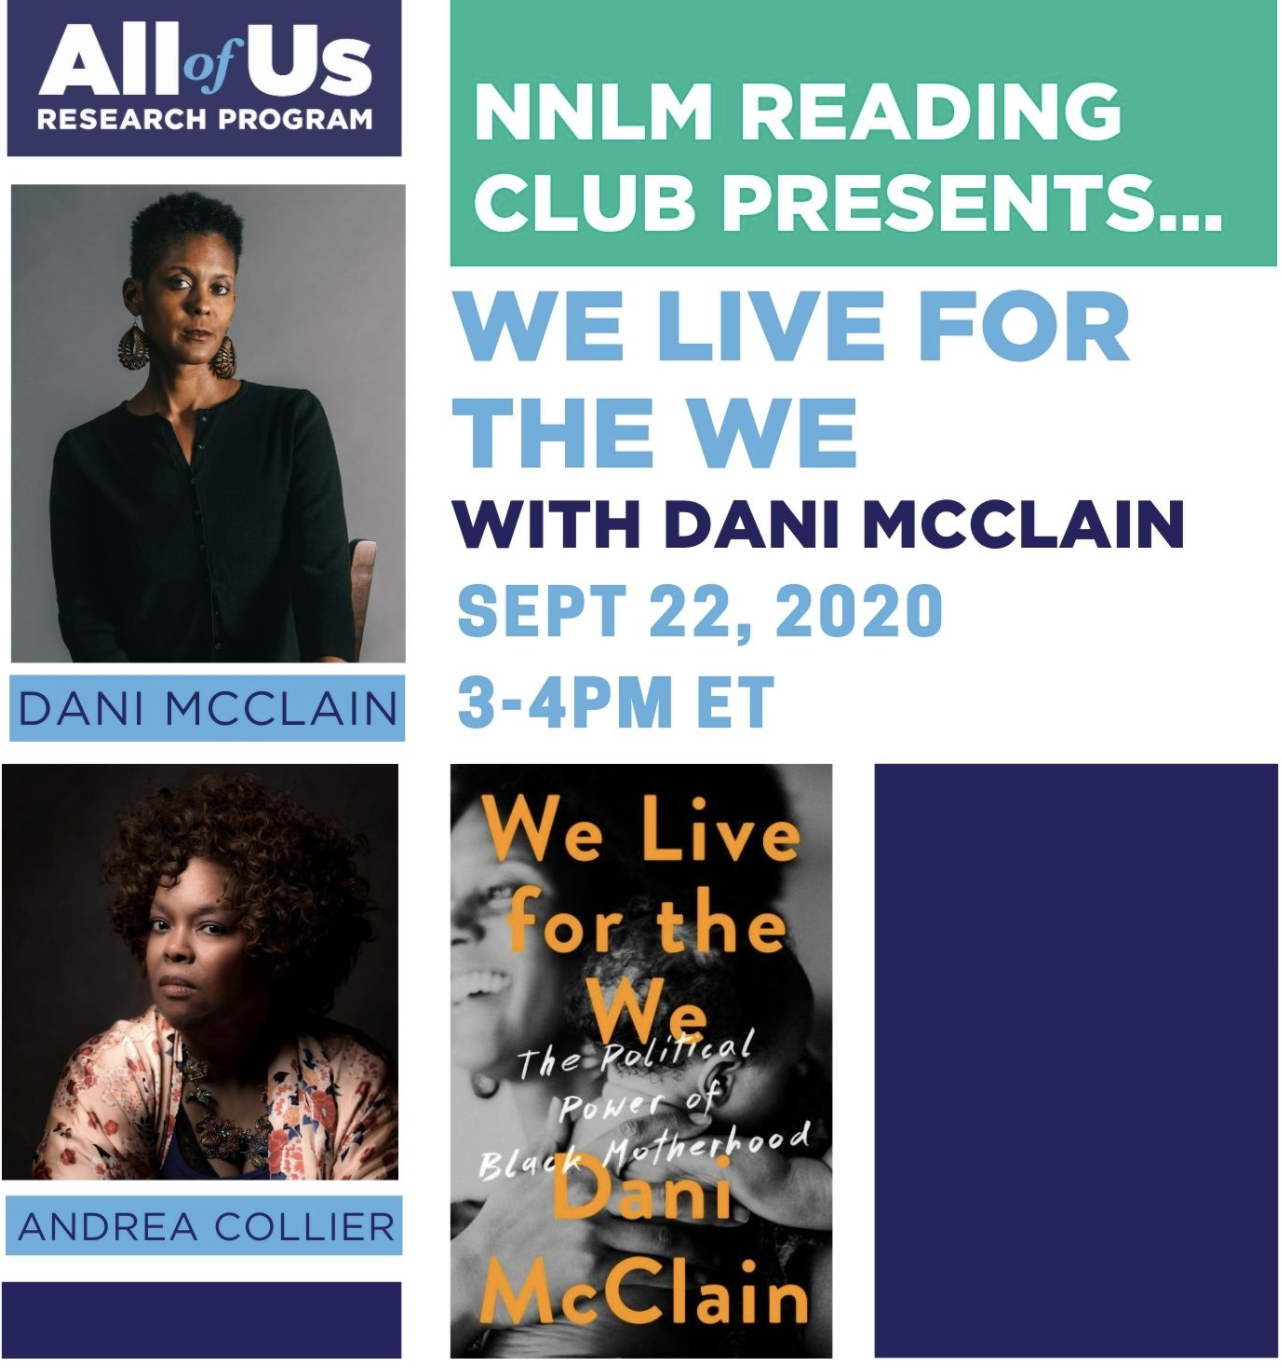 NNLM Reading Club Presents... We Live for the We